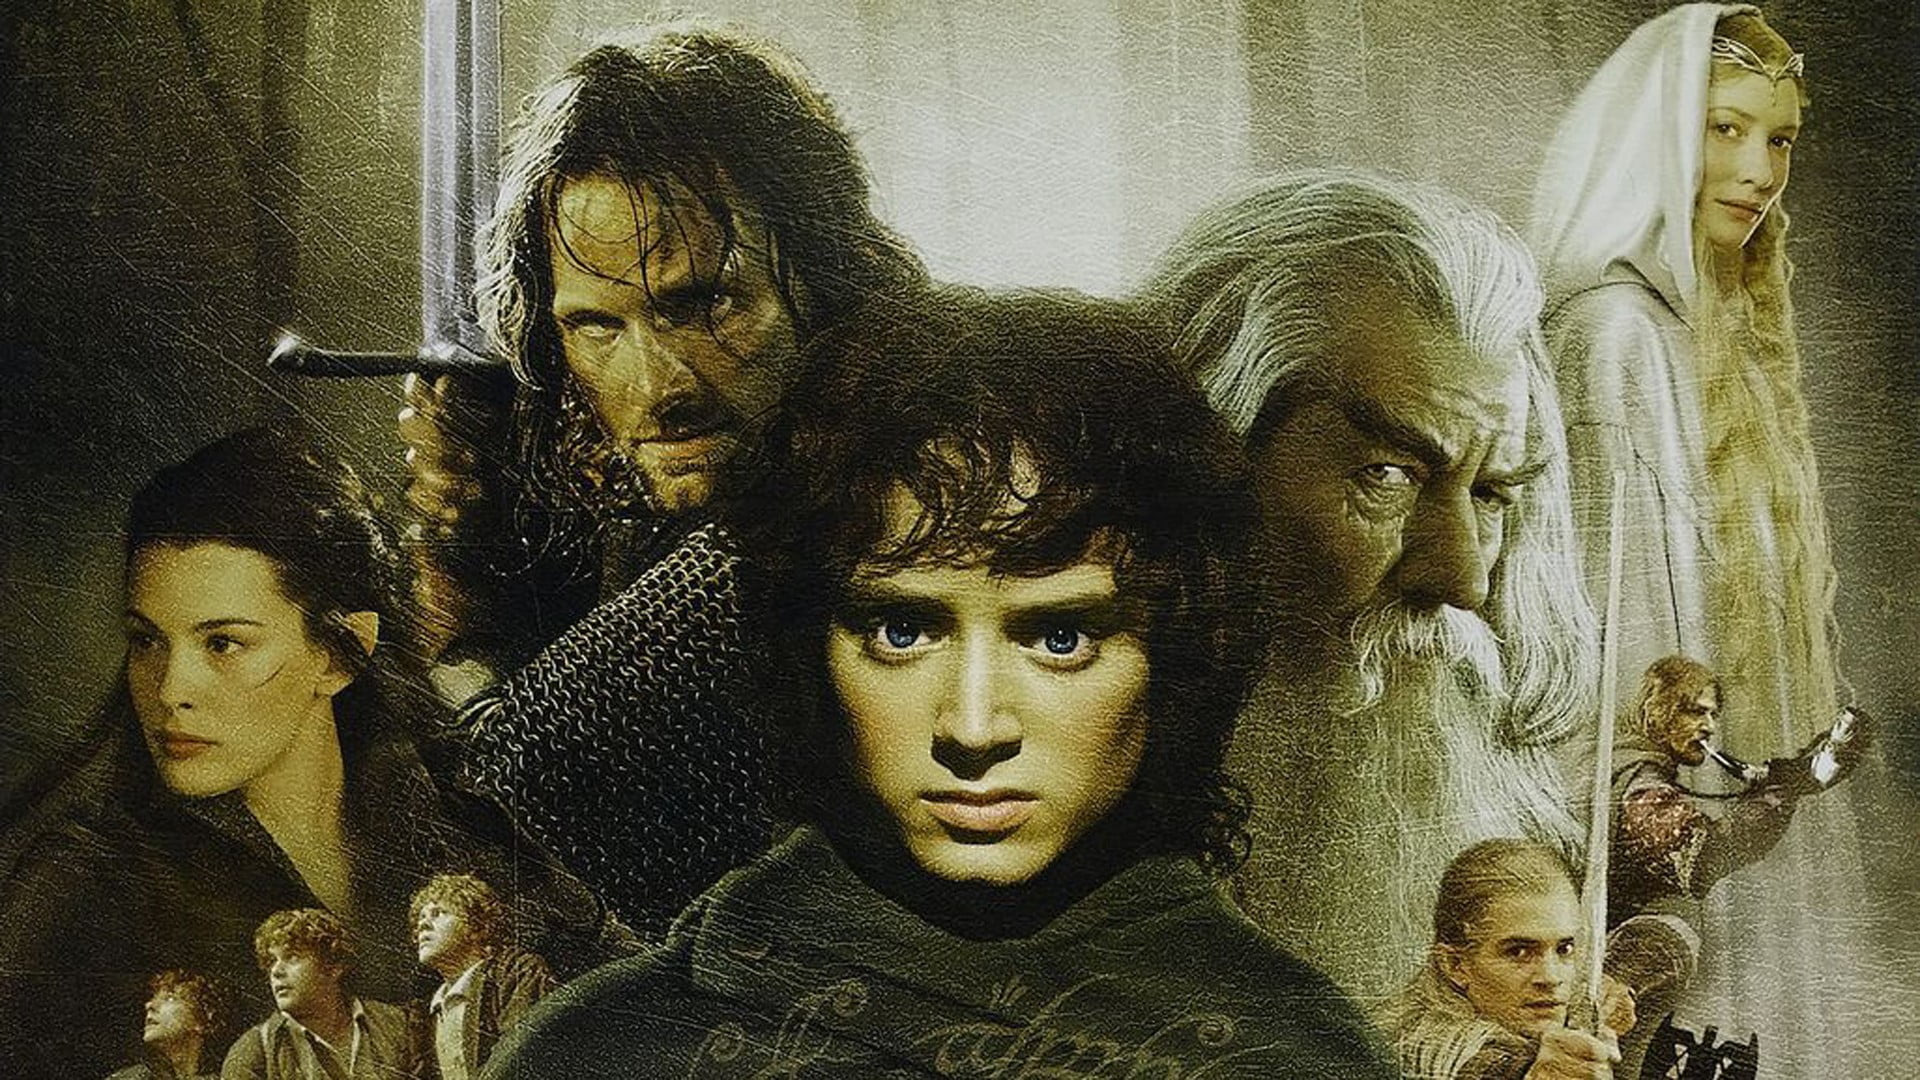 The Lord of the Rings digital wallpaper, movies, Frodo Baggins